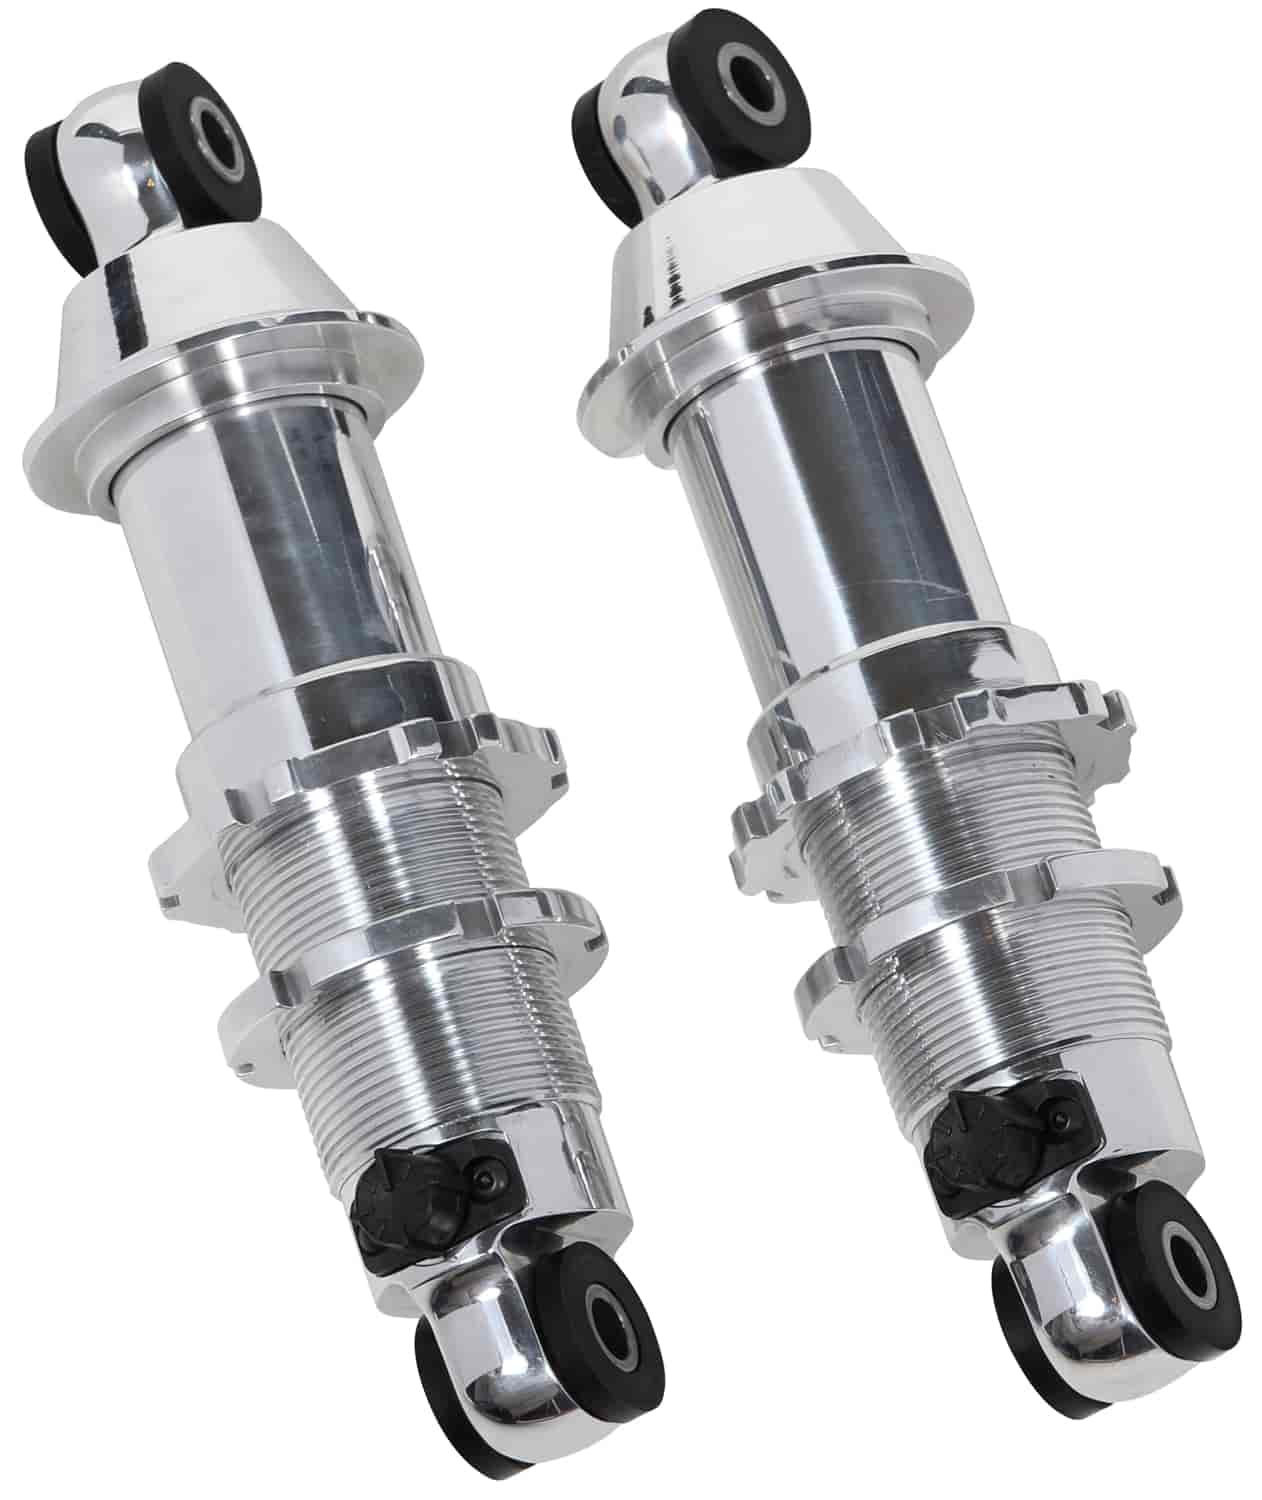 Front Adjustable Coil Over Shocks for Openwheel Vehicles